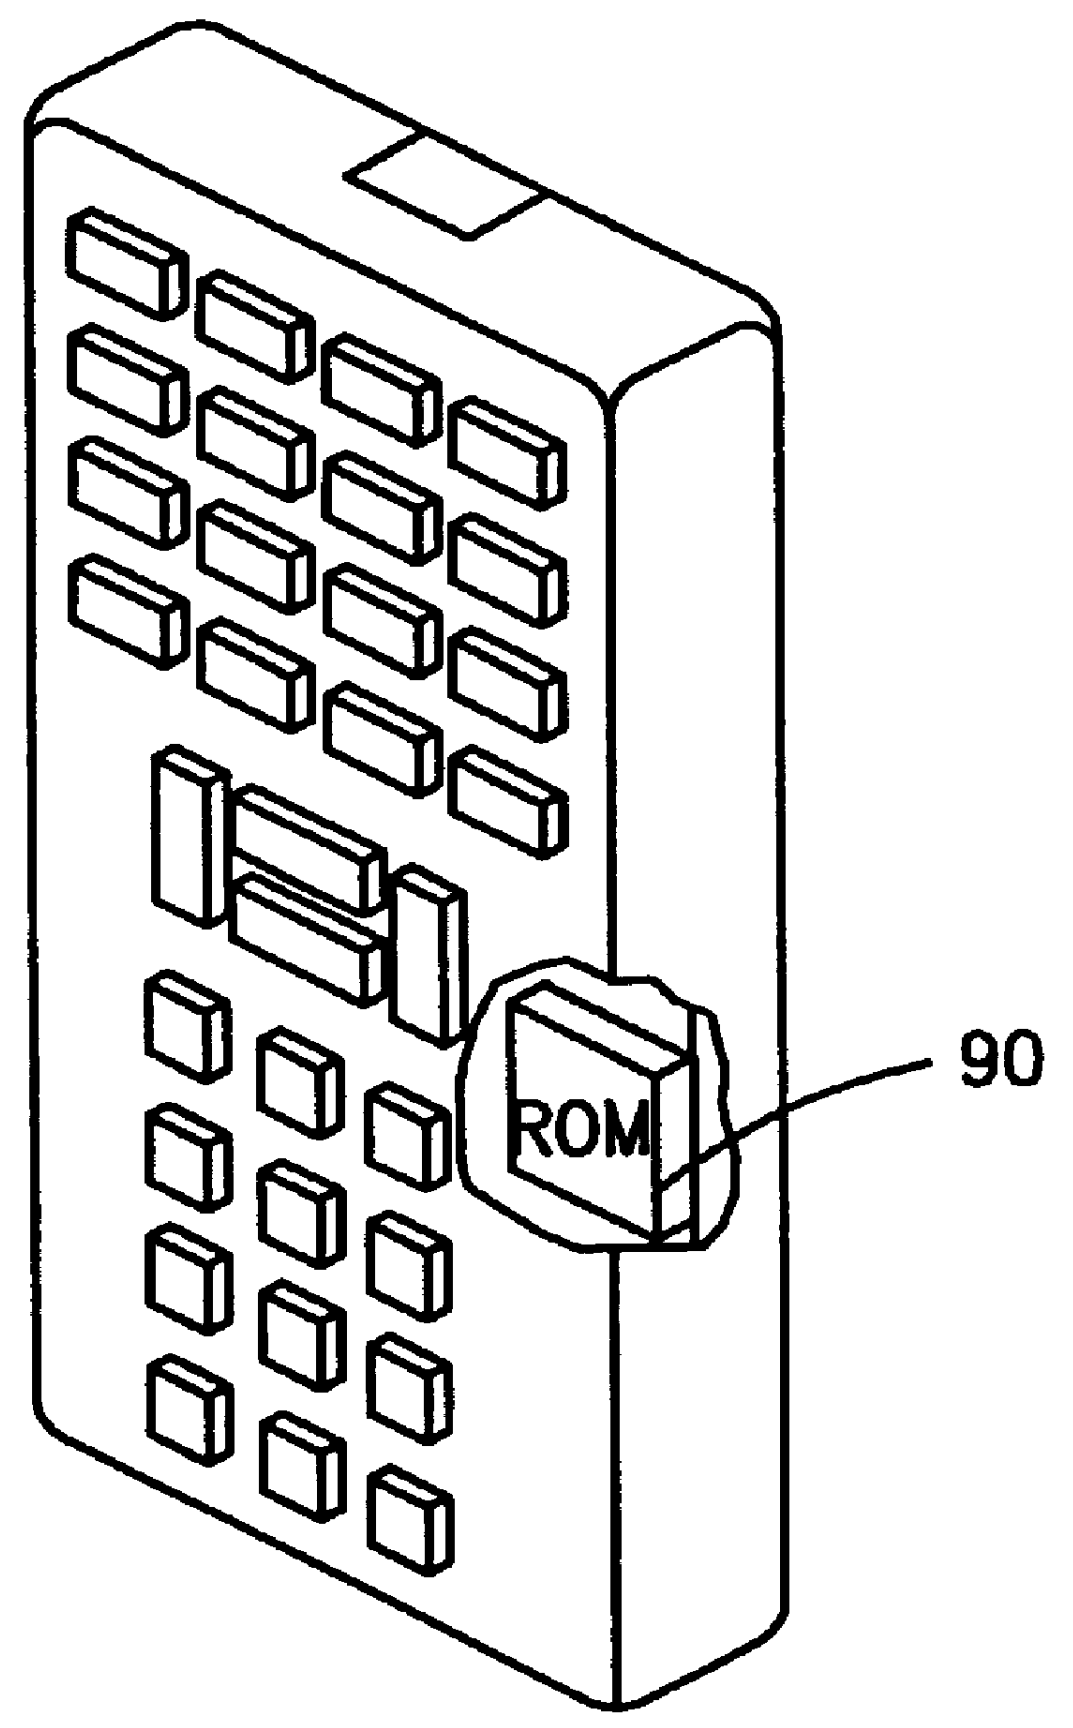 Computer-based universal remote control system